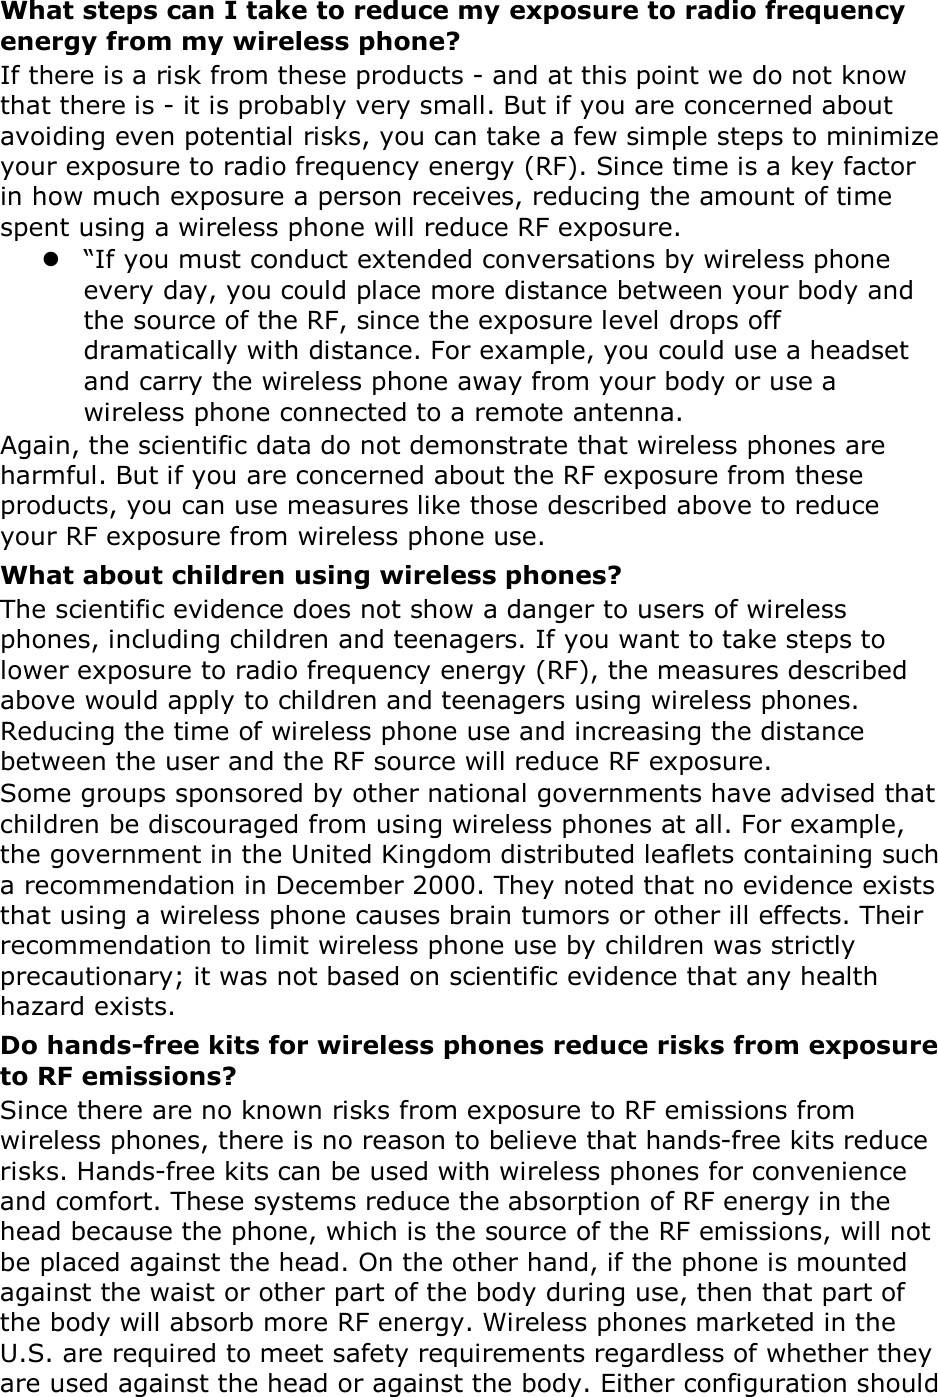 What steps can I take to reduce my exposure to radio frequency energy from my wireless phone? If there is a risk from these products - and at this point we do not know that there is - it is probably very small. But if you are concerned about avoiding even potential risks, you can take a few simple steps to minimize your exposure to radio frequency energy (RF). Since time is a key factor in how much exposure a person receives, reducing the amount of time spent using a wireless phone will reduce RF exposure.  “If you must conduct extended conversations by wireless phone every day, you could place more distance between your body and the source of the RF, since the exposure level drops off dramatically with distance. For example, you could use a headset and carry the wireless phone away from your body or use a wireless phone connected to a remote antenna. Again, the scientific data do not demonstrate that wireless phones are harmful. But if you are concerned about the RF exposure from these products, you can use measures like those described above to reduce your RF exposure from wireless phone use. What about children using wireless phones? The scientific evidence does not show a danger to users of wireless phones, including children and teenagers. If you want to take steps to lower exposure to radio frequency energy (RF), the measures described above would apply to children and teenagers using wireless phones. Reducing the time of wireless phone use and increasing the distance between the user and the RF source will reduce RF exposure. Some groups sponsored by other national governments have advised that children be discouraged from using wireless phones at all. For example, the government in the United Kingdom distributed leaflets containing such a recommendation in December 2000. They noted that no evidence exists that using a wireless phone causes brain tumors or other ill effects. Their recommendation to limit wireless phone use by children was strictly precautionary; it was not based on scientific evidence that any health hazard exists.   Do hands-free kits for wireless phones reduce risks from exposure to RF emissions? Since there are no known risks from exposure to RF emissions from wireless phones, there is no reason to believe that hands-free kits reduce risks. Hands-free kits can be used with wireless phones for convenience and comfort. These systems reduce the absorption of RF energy in the head because the phone, which is the source of the RF emissions, will not be placed against the head. On the other hand, if the phone is mounted against the waist or other part of the body during use, then that part of the body will absorb more RF energy. Wireless phones marketed in the U.S. are required to meet safety requirements regardless of whether they are used against the head or against the body. Either configuration should 